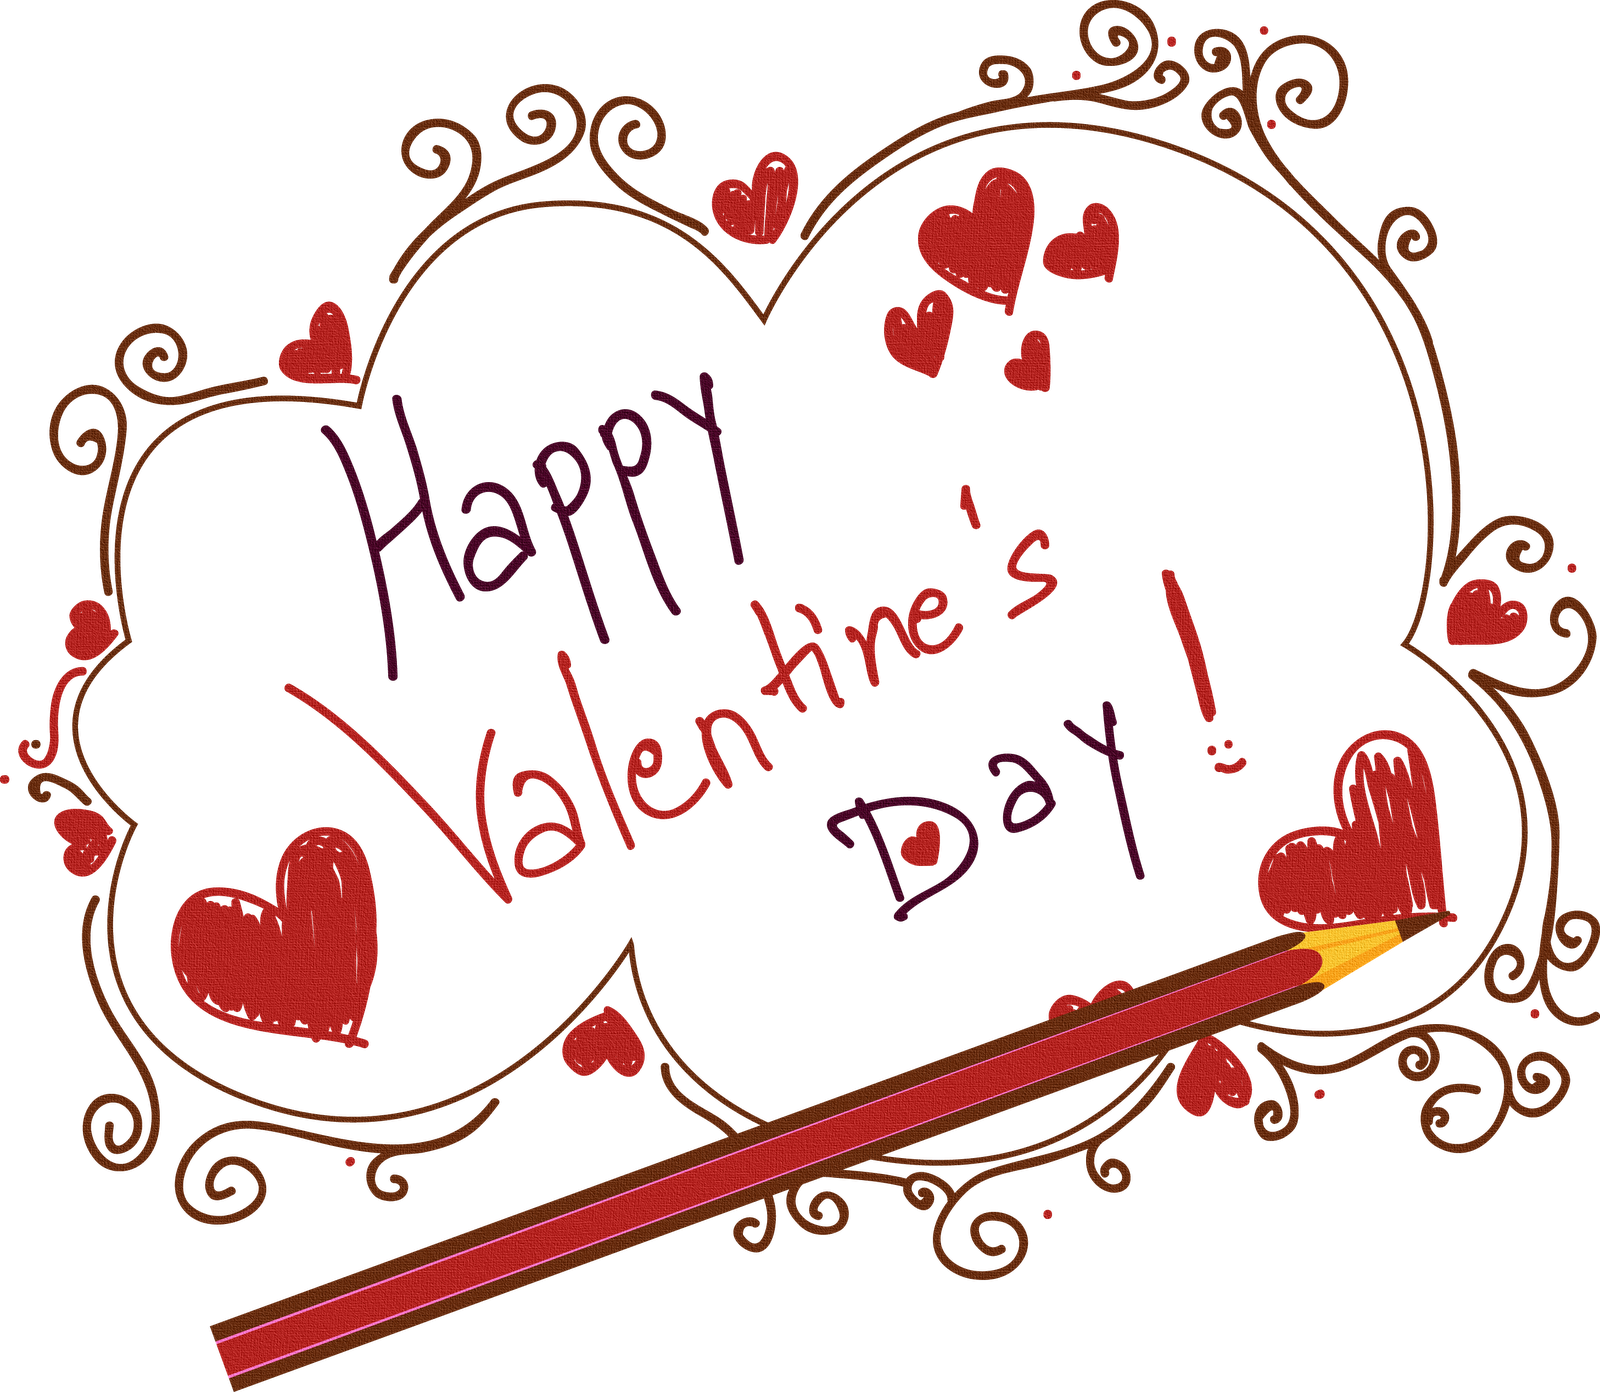 Happy Valentine’s Day Free Download PNG